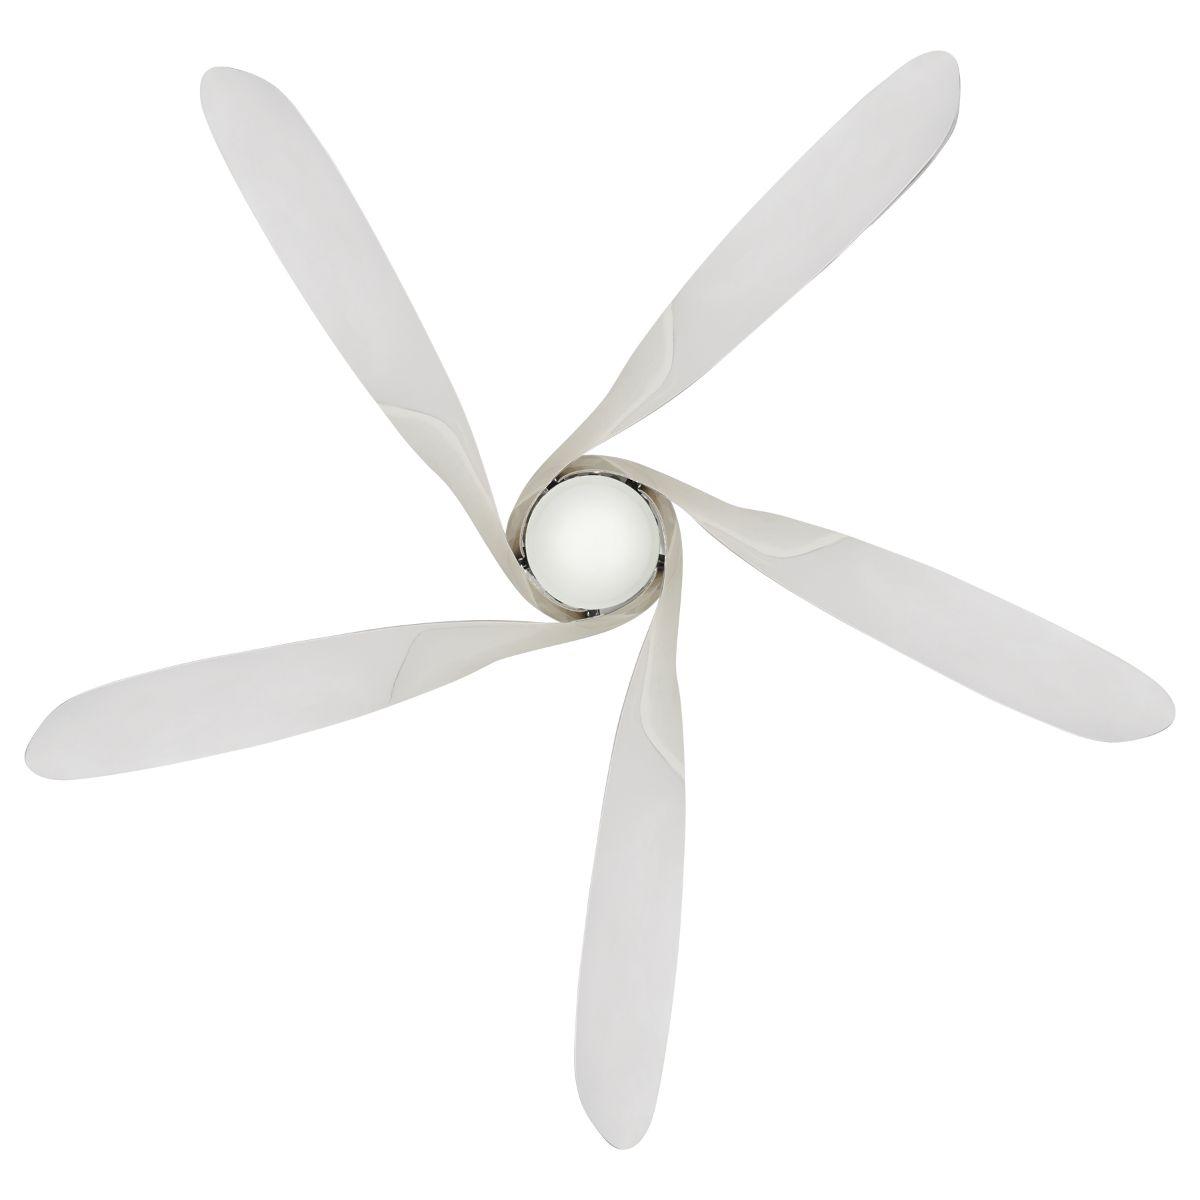 Artemis XL5 62 Inch Contemporary Propeller Ceiling Fan With Light And Remote